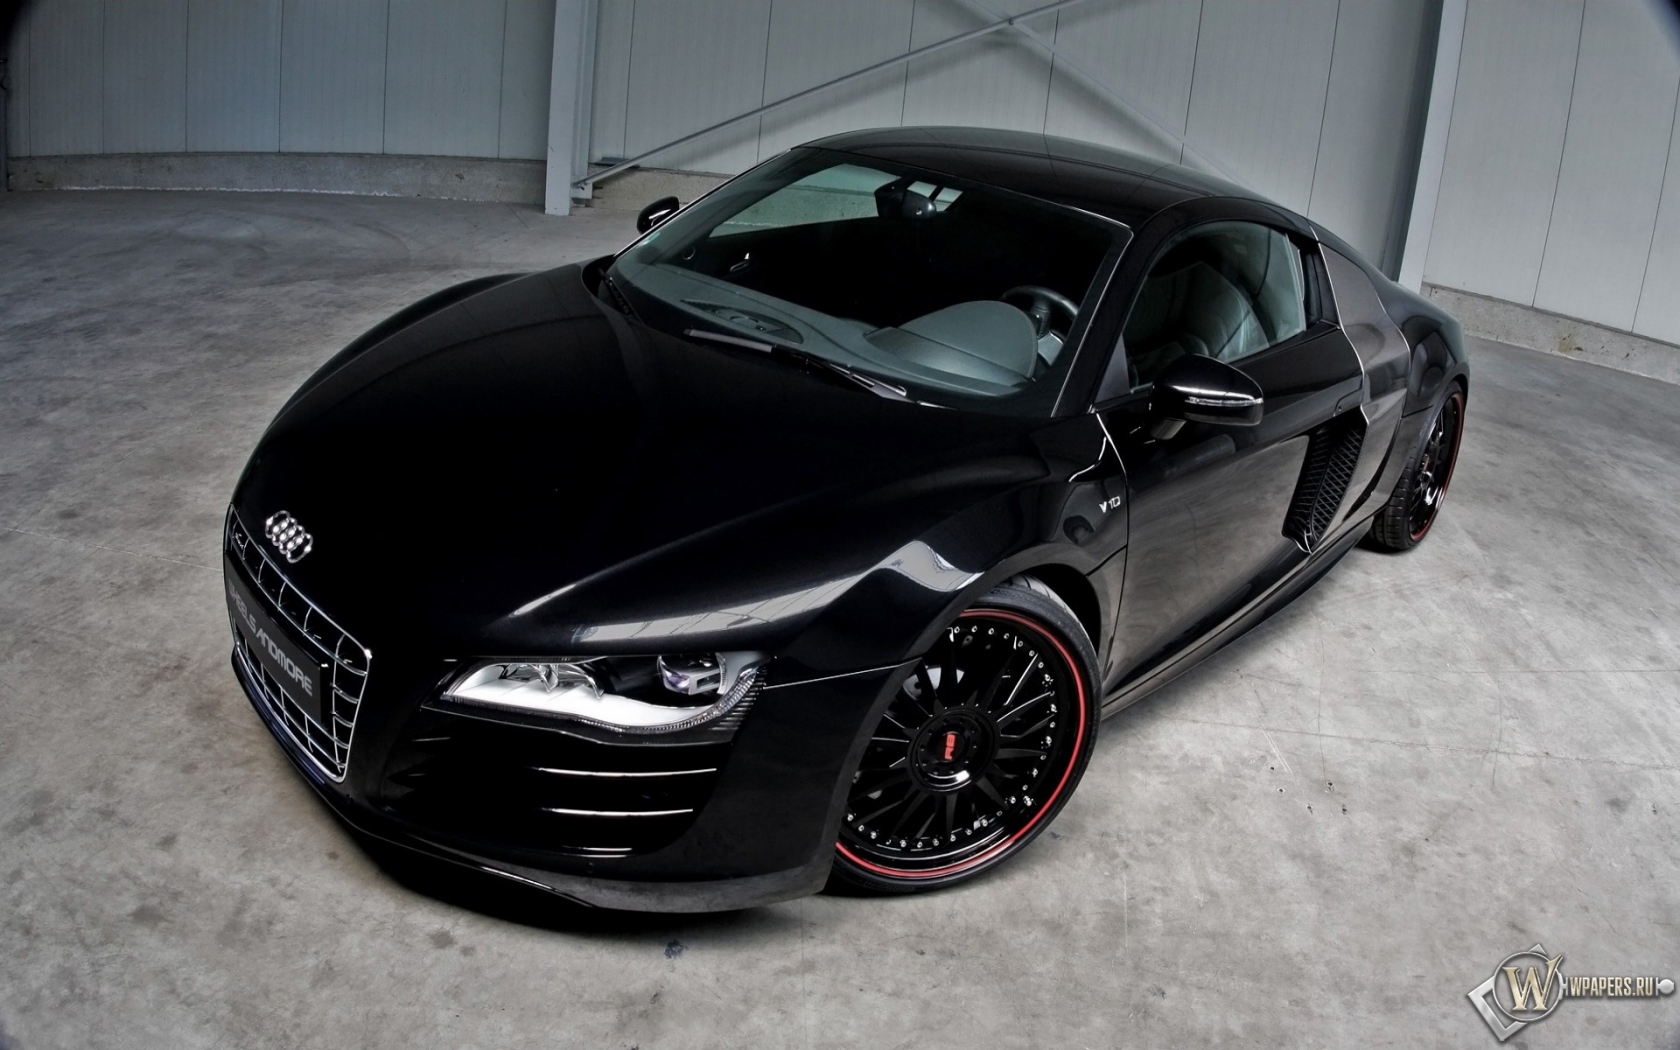 2011 Wheelsandmore Audi R8 V10 .6 - Front Angle Top 1680x1050